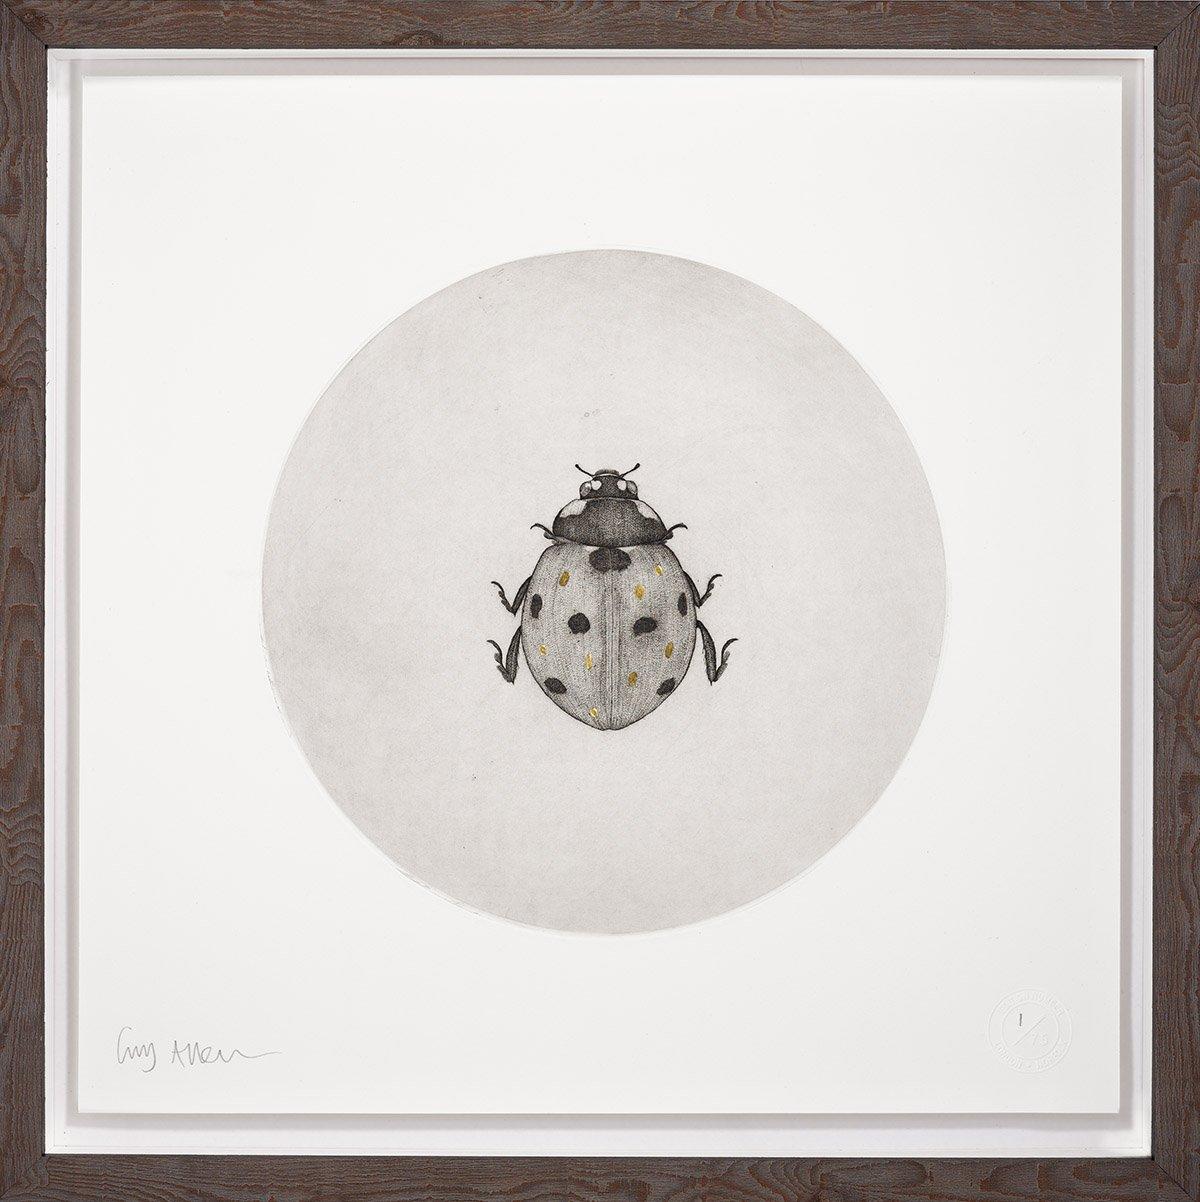 The ladybird, locally known in Norfolk as a bishy barnabee…

Guy Allen’s etchings inspired by the fauna of Norfolk have a remarkable level of detail.  His etchings capture the character and spirit of his subjects.

Etching on 300gsm Somerset paper